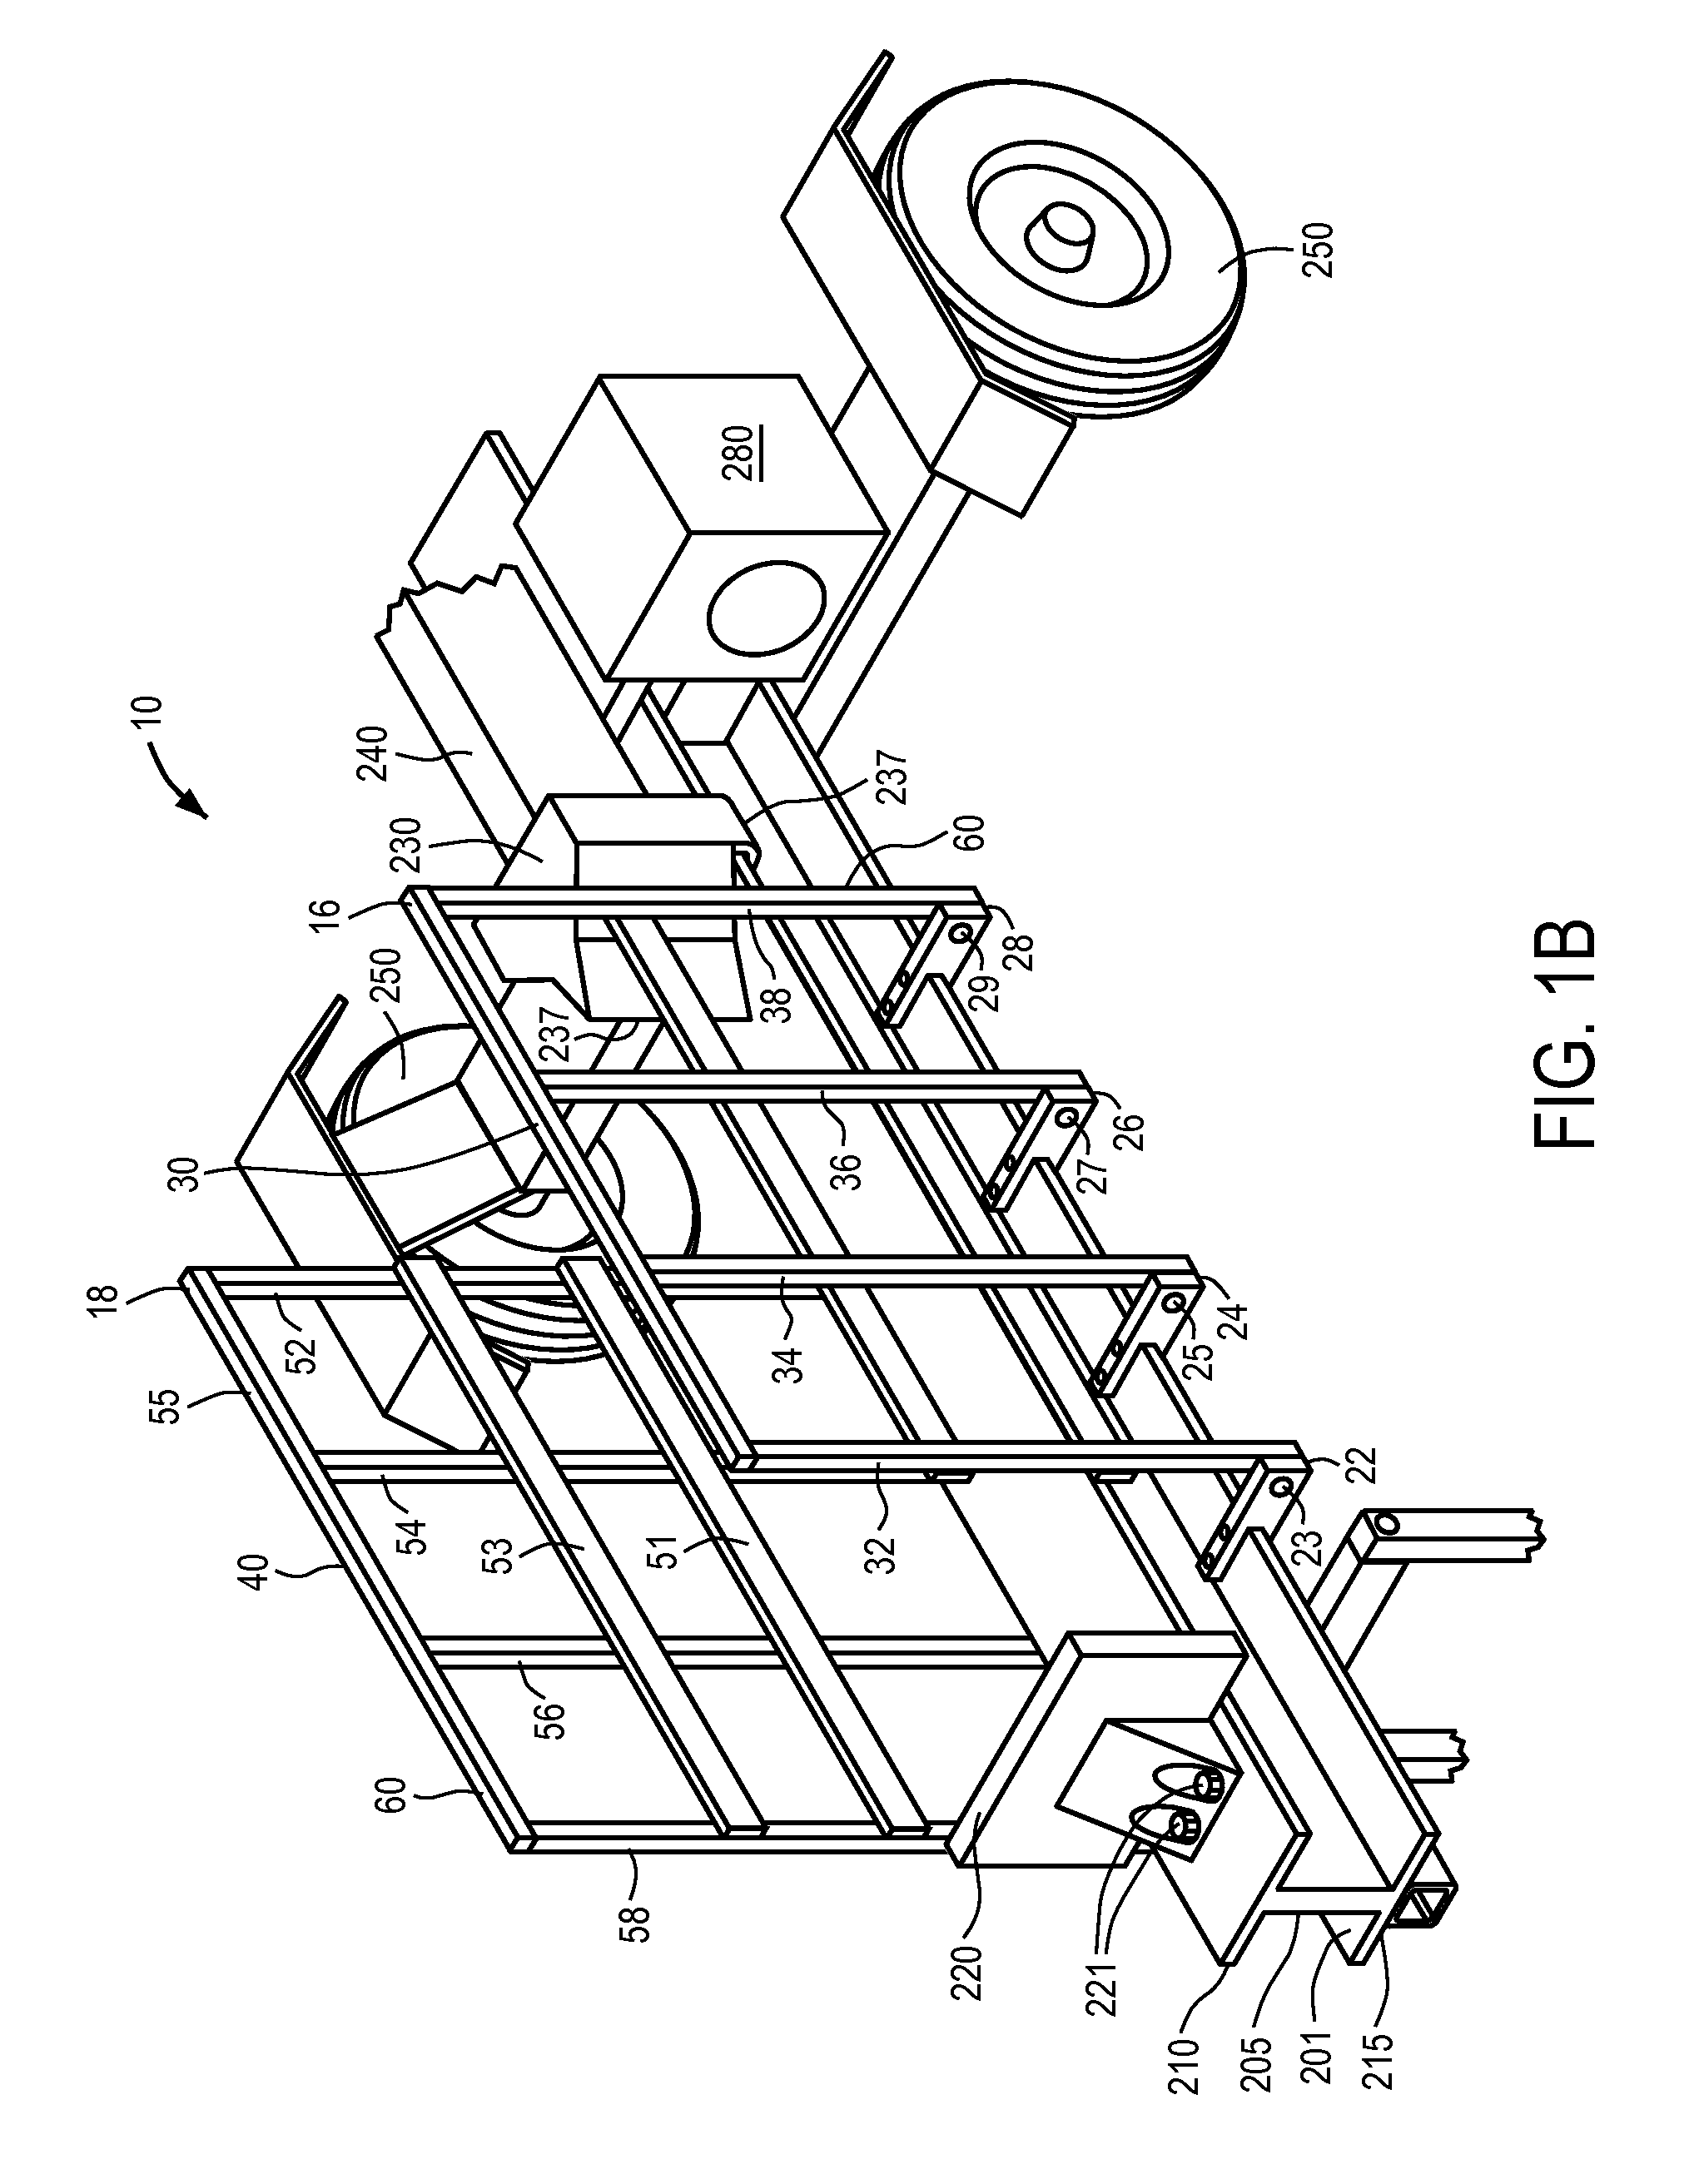 Log splitter apparatus and related methods